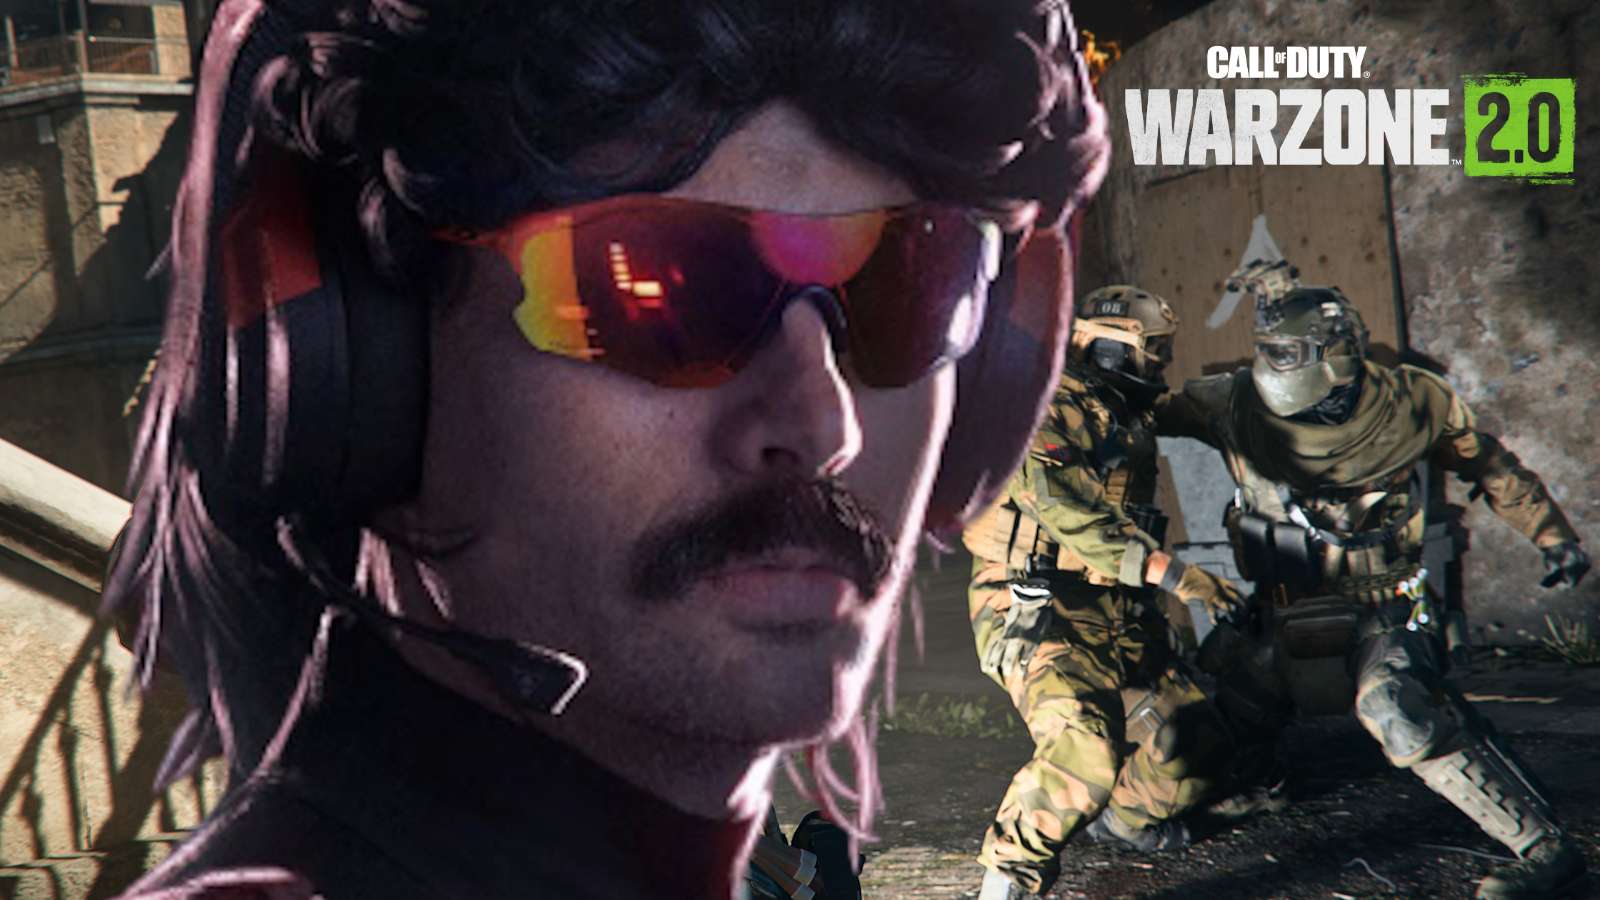 dr disrespect trolls warzone 2 player with proximity chat